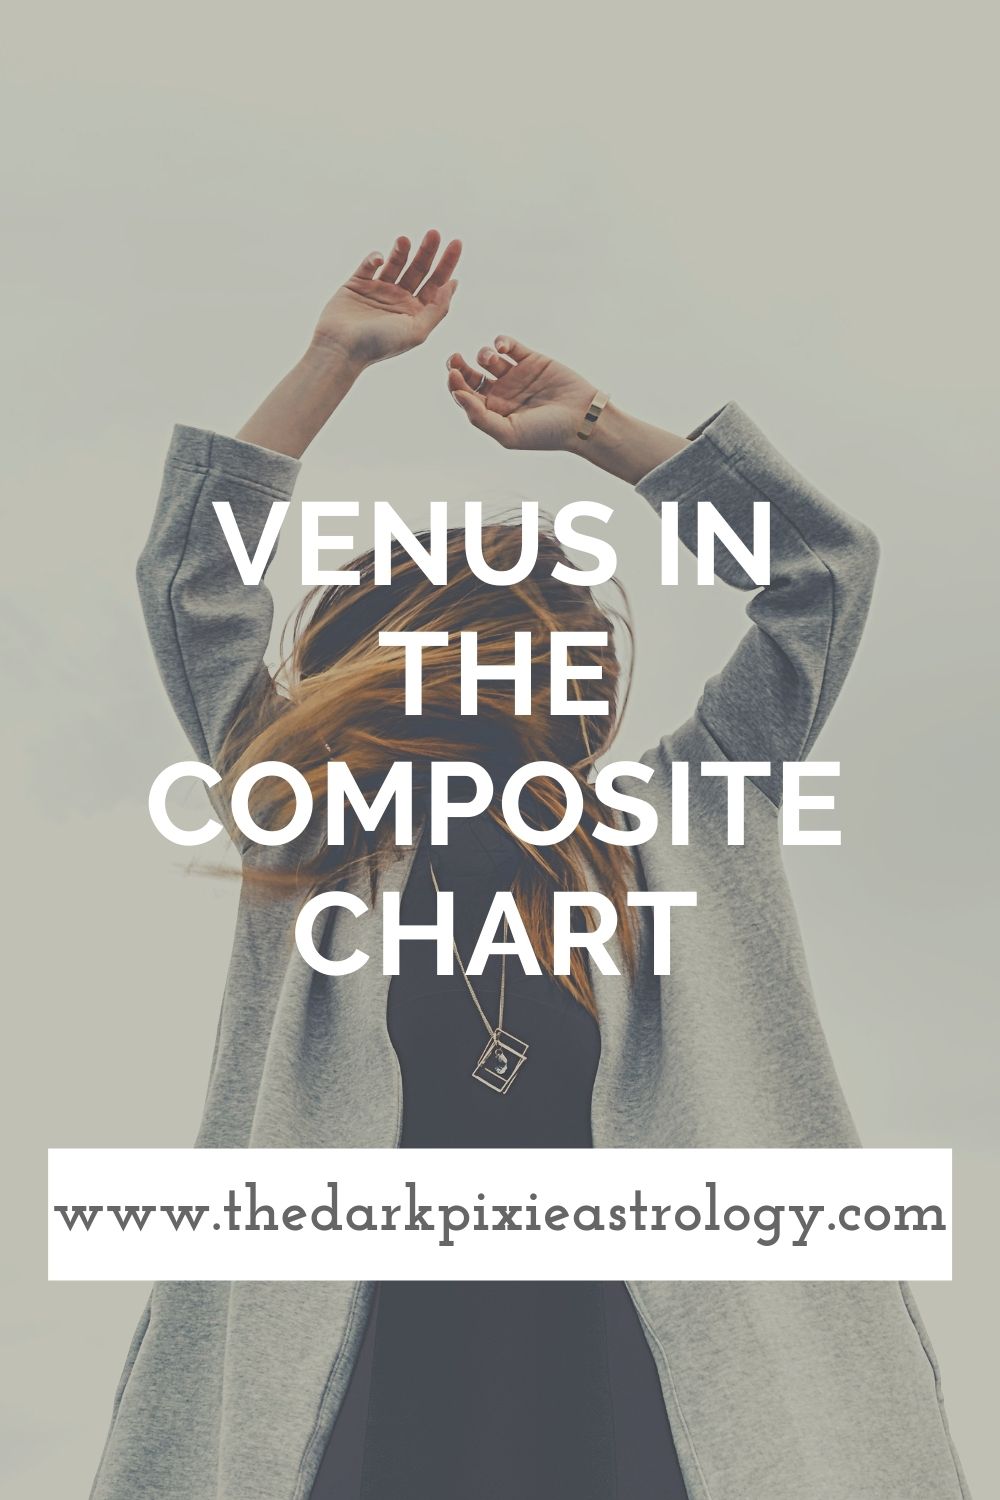 Venus in the Composite Chart - The Dark Pixie Astrology